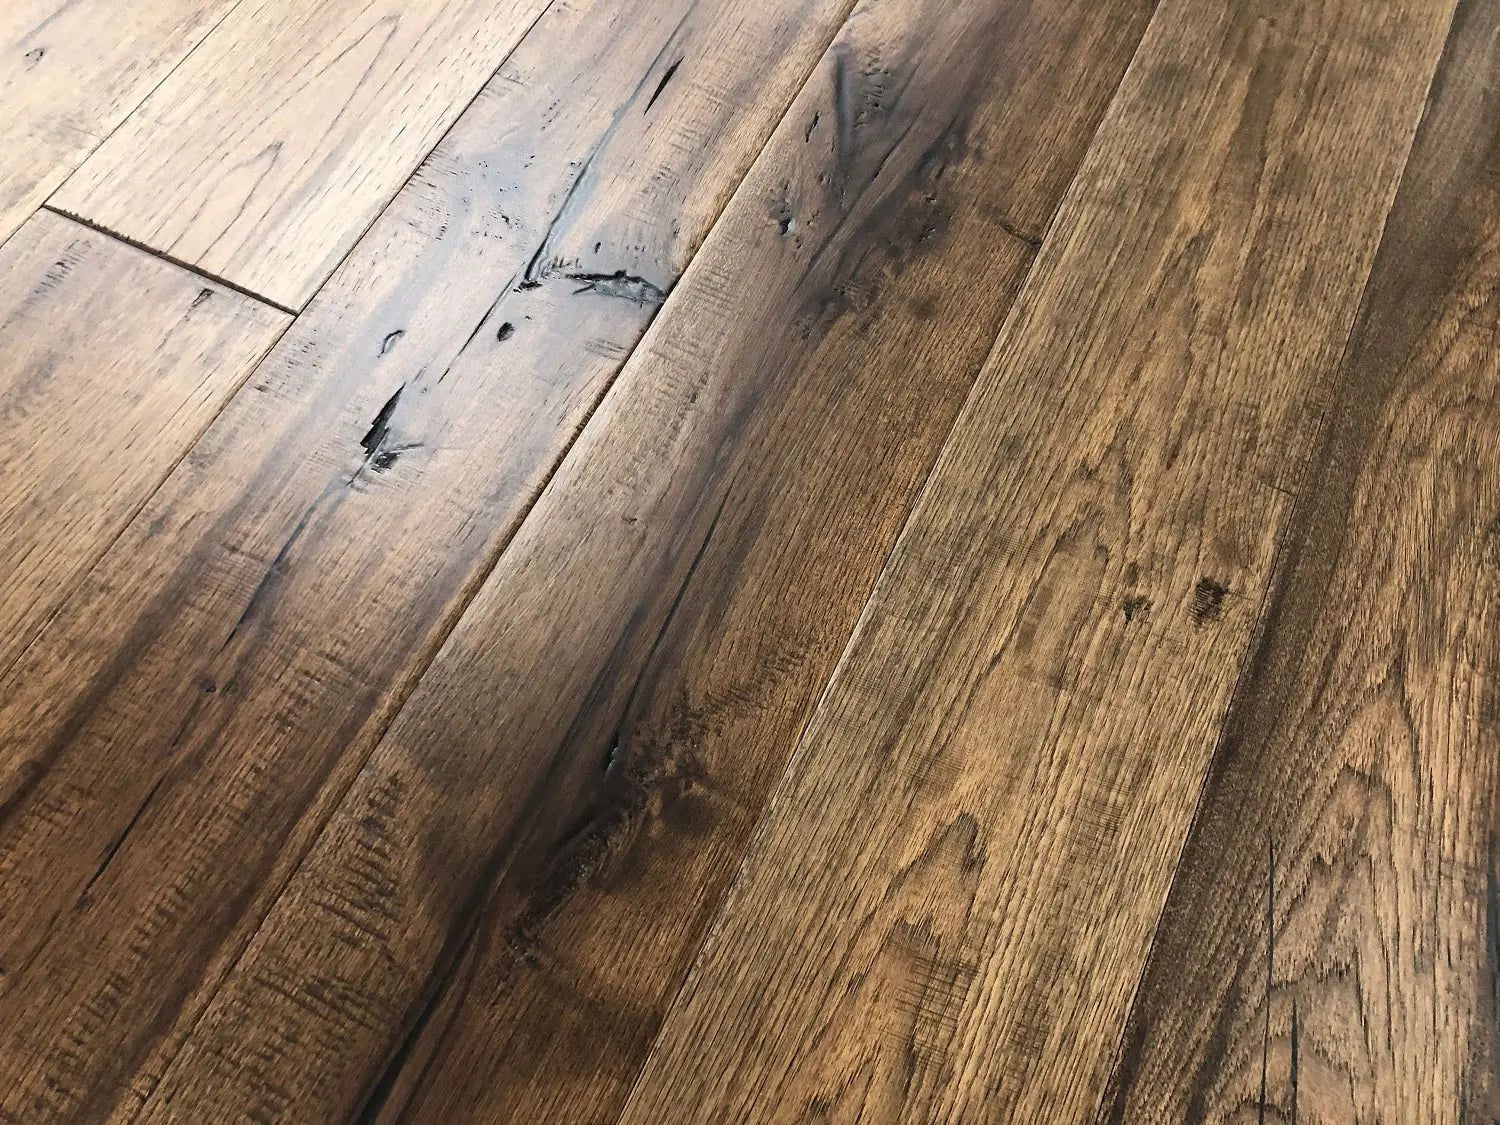 The specialty of hand scraped wood floors